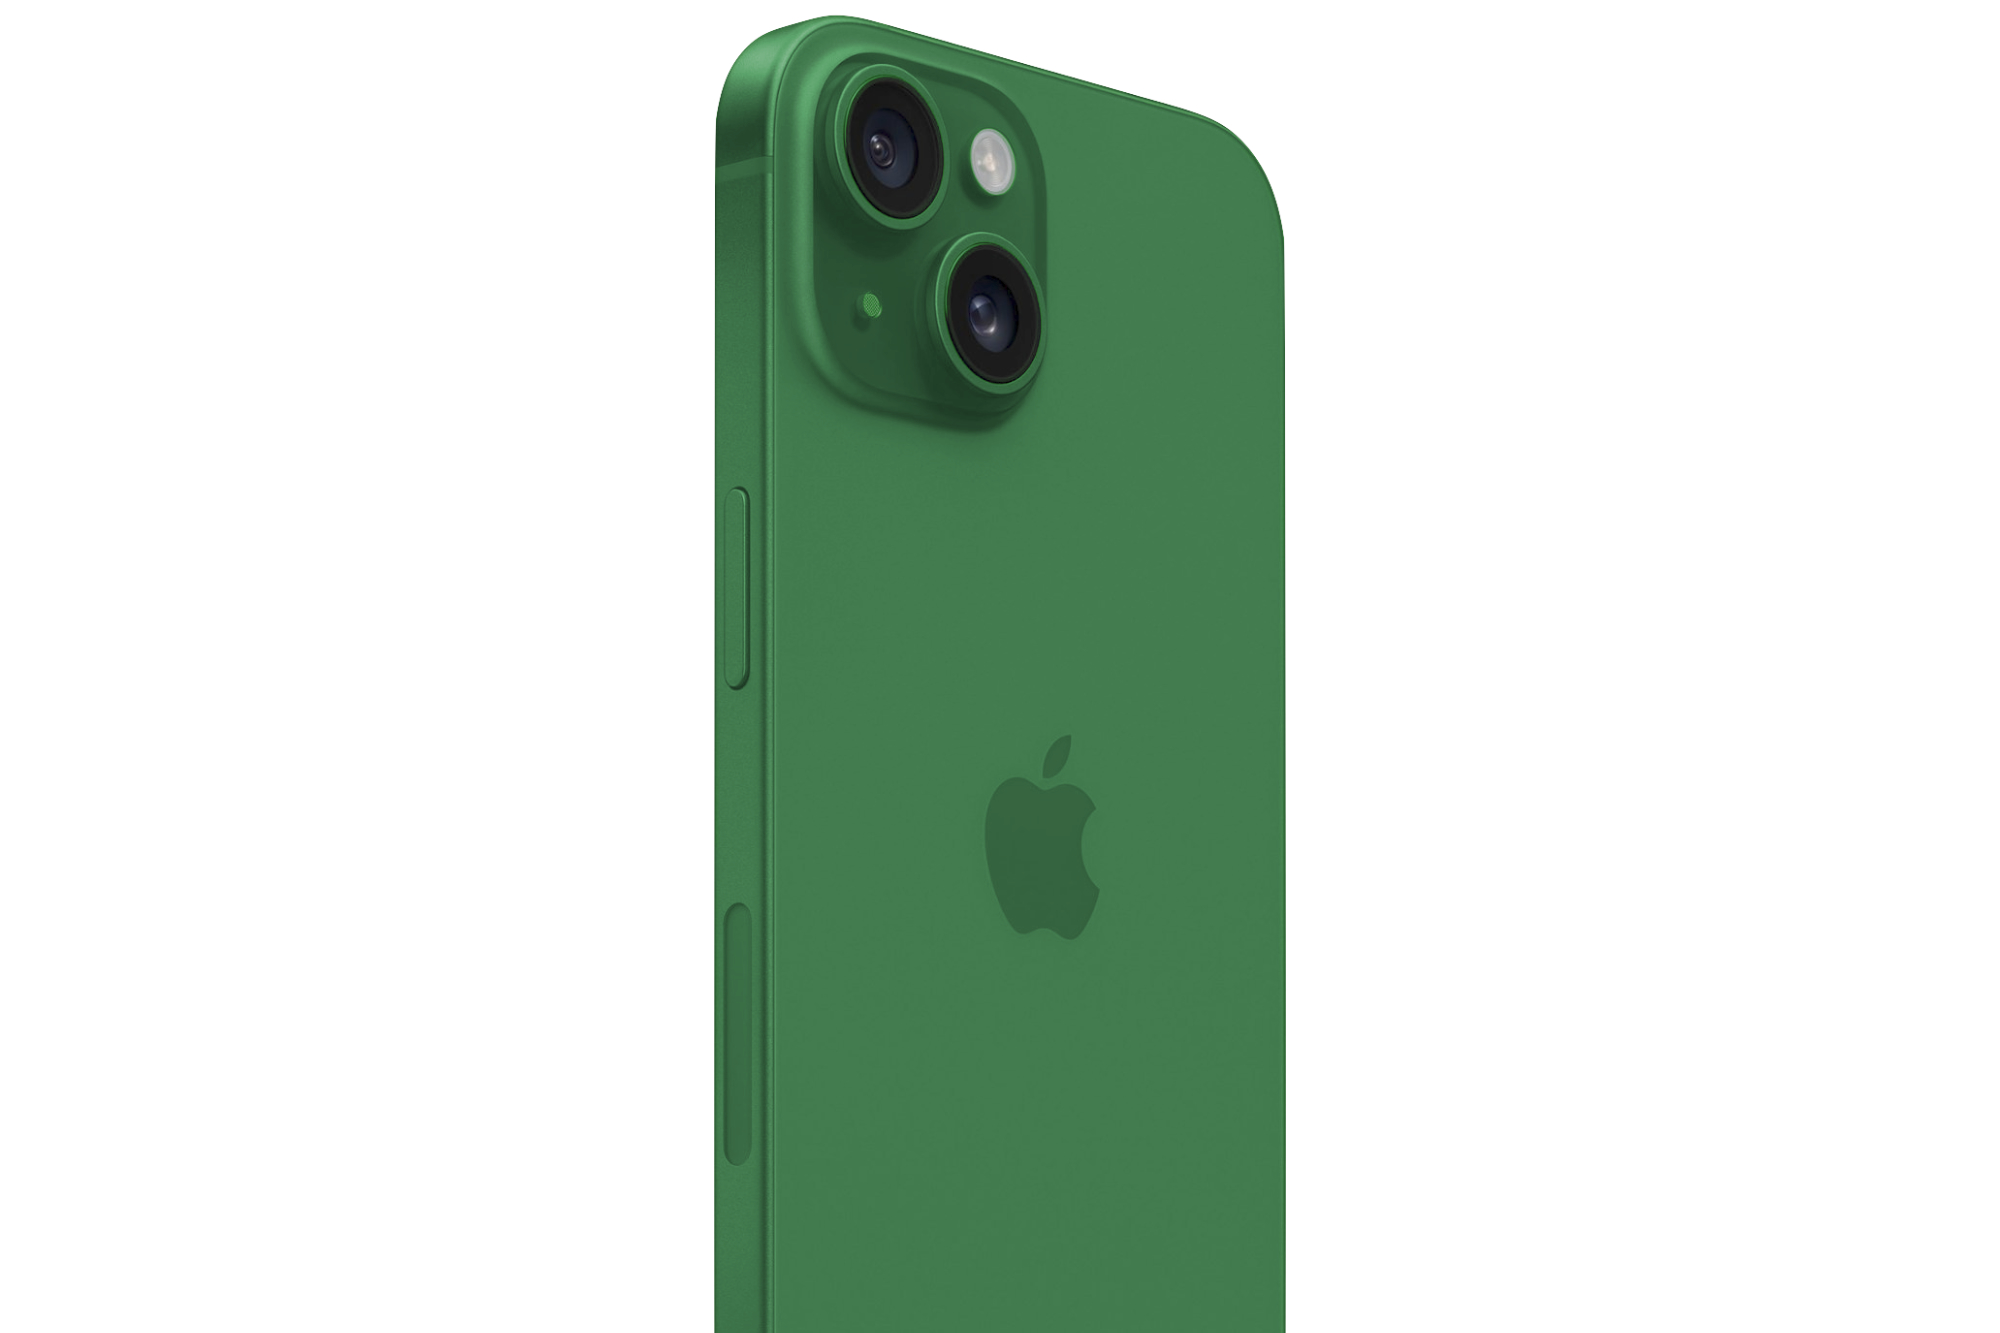 Render of the iPhone 15 in a green color.